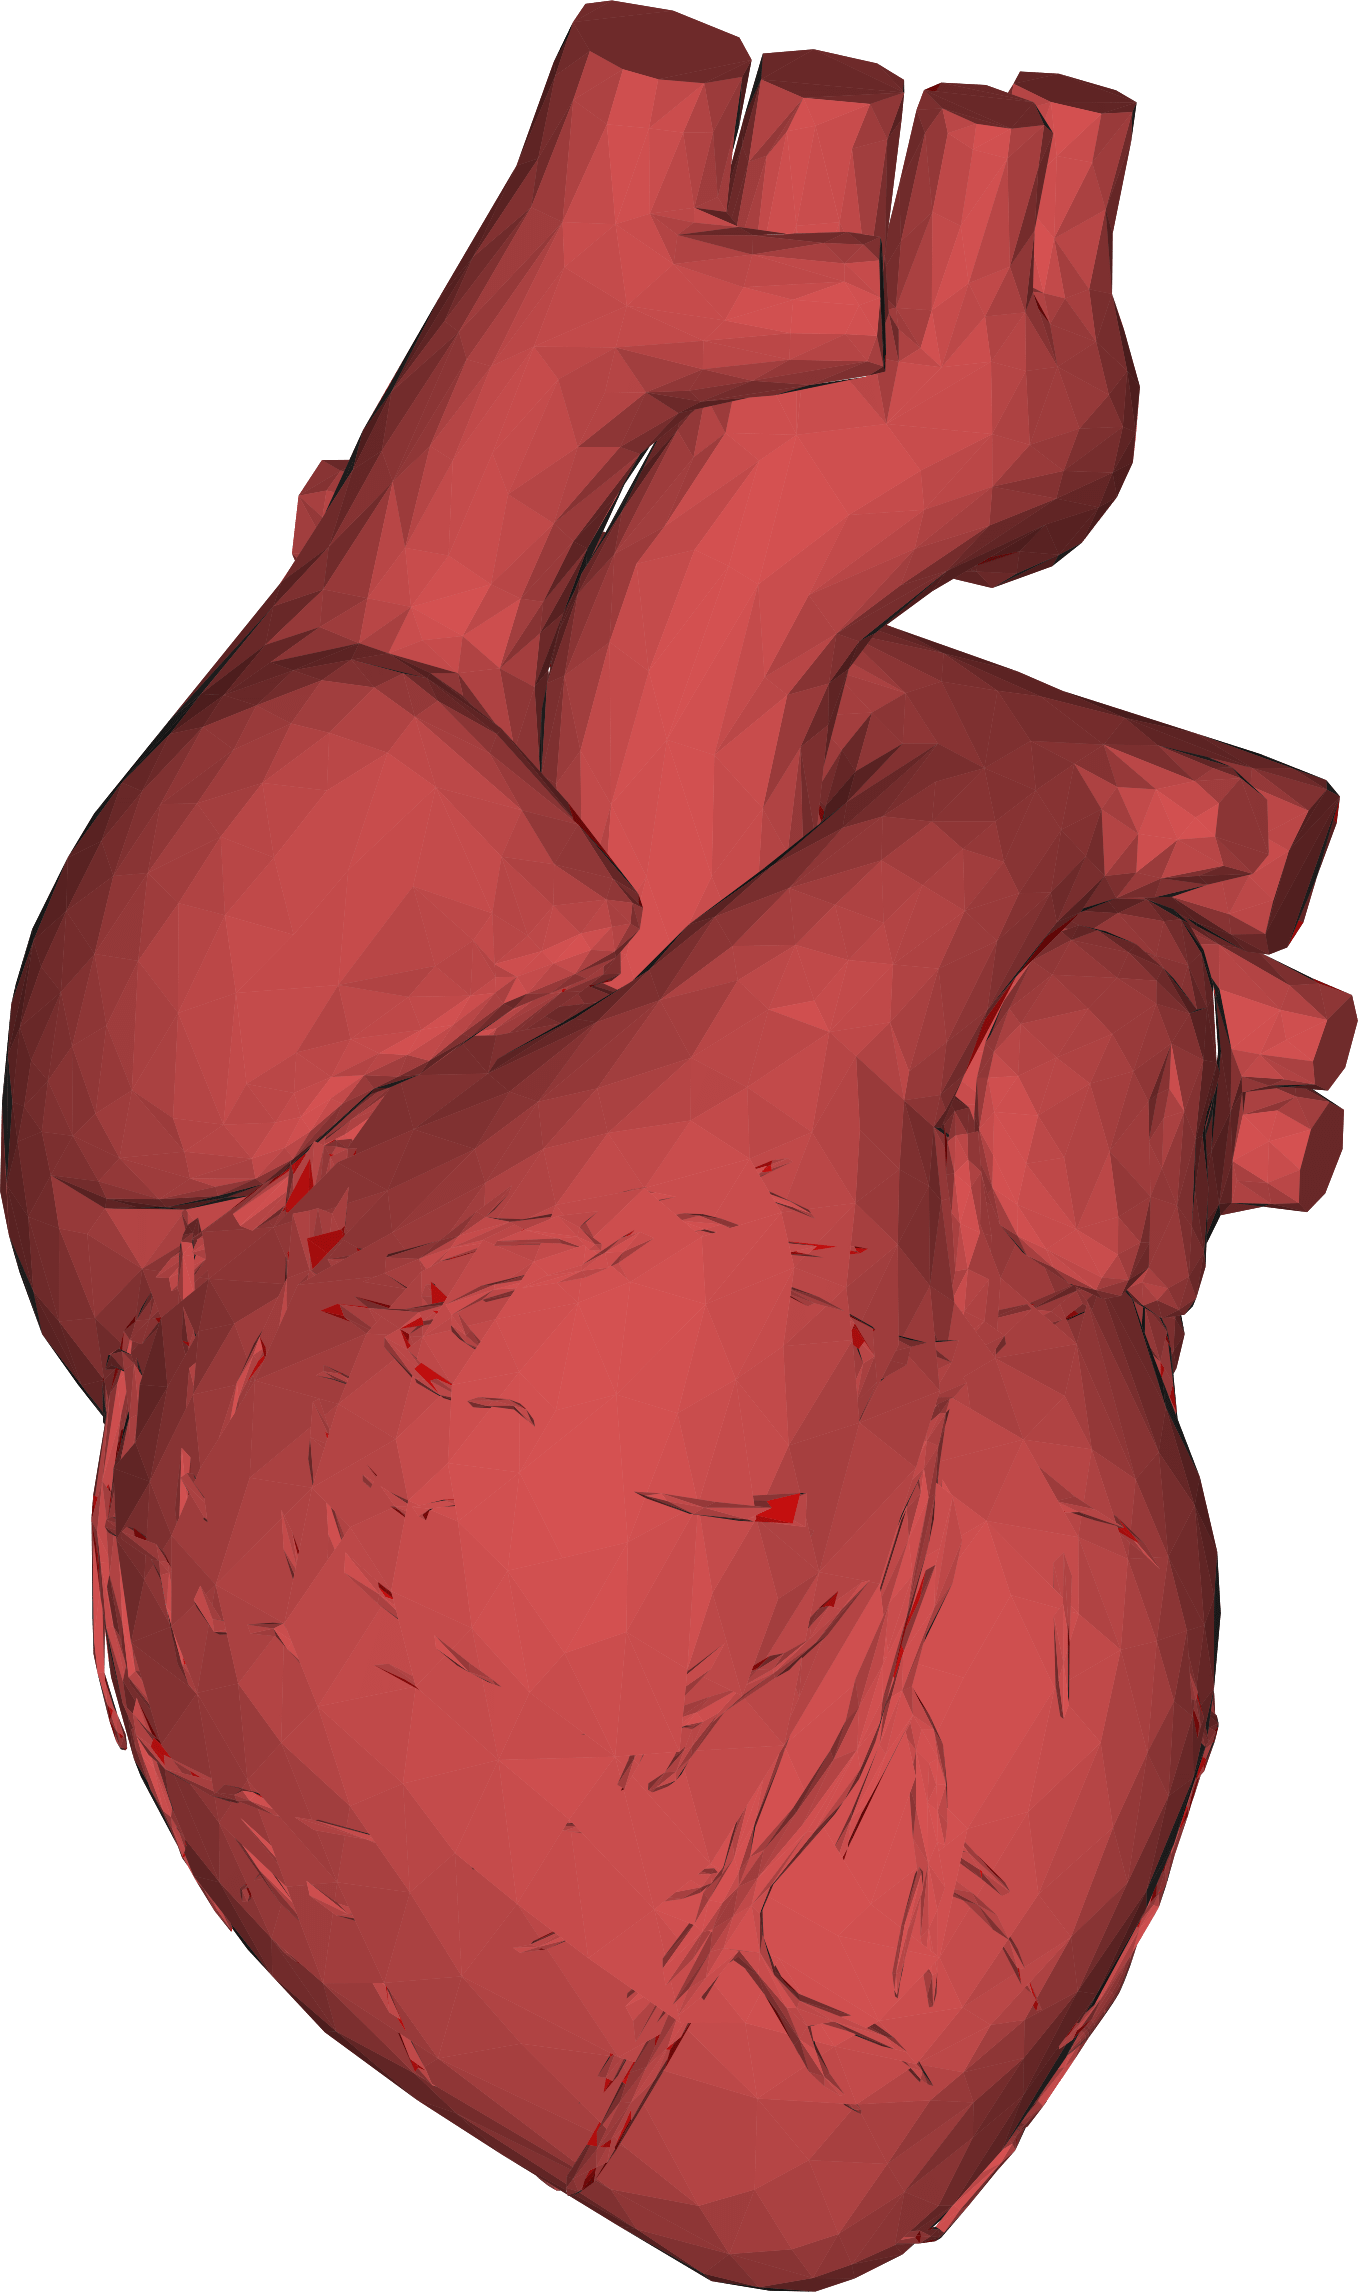 Red Human Heart PNG Image Background